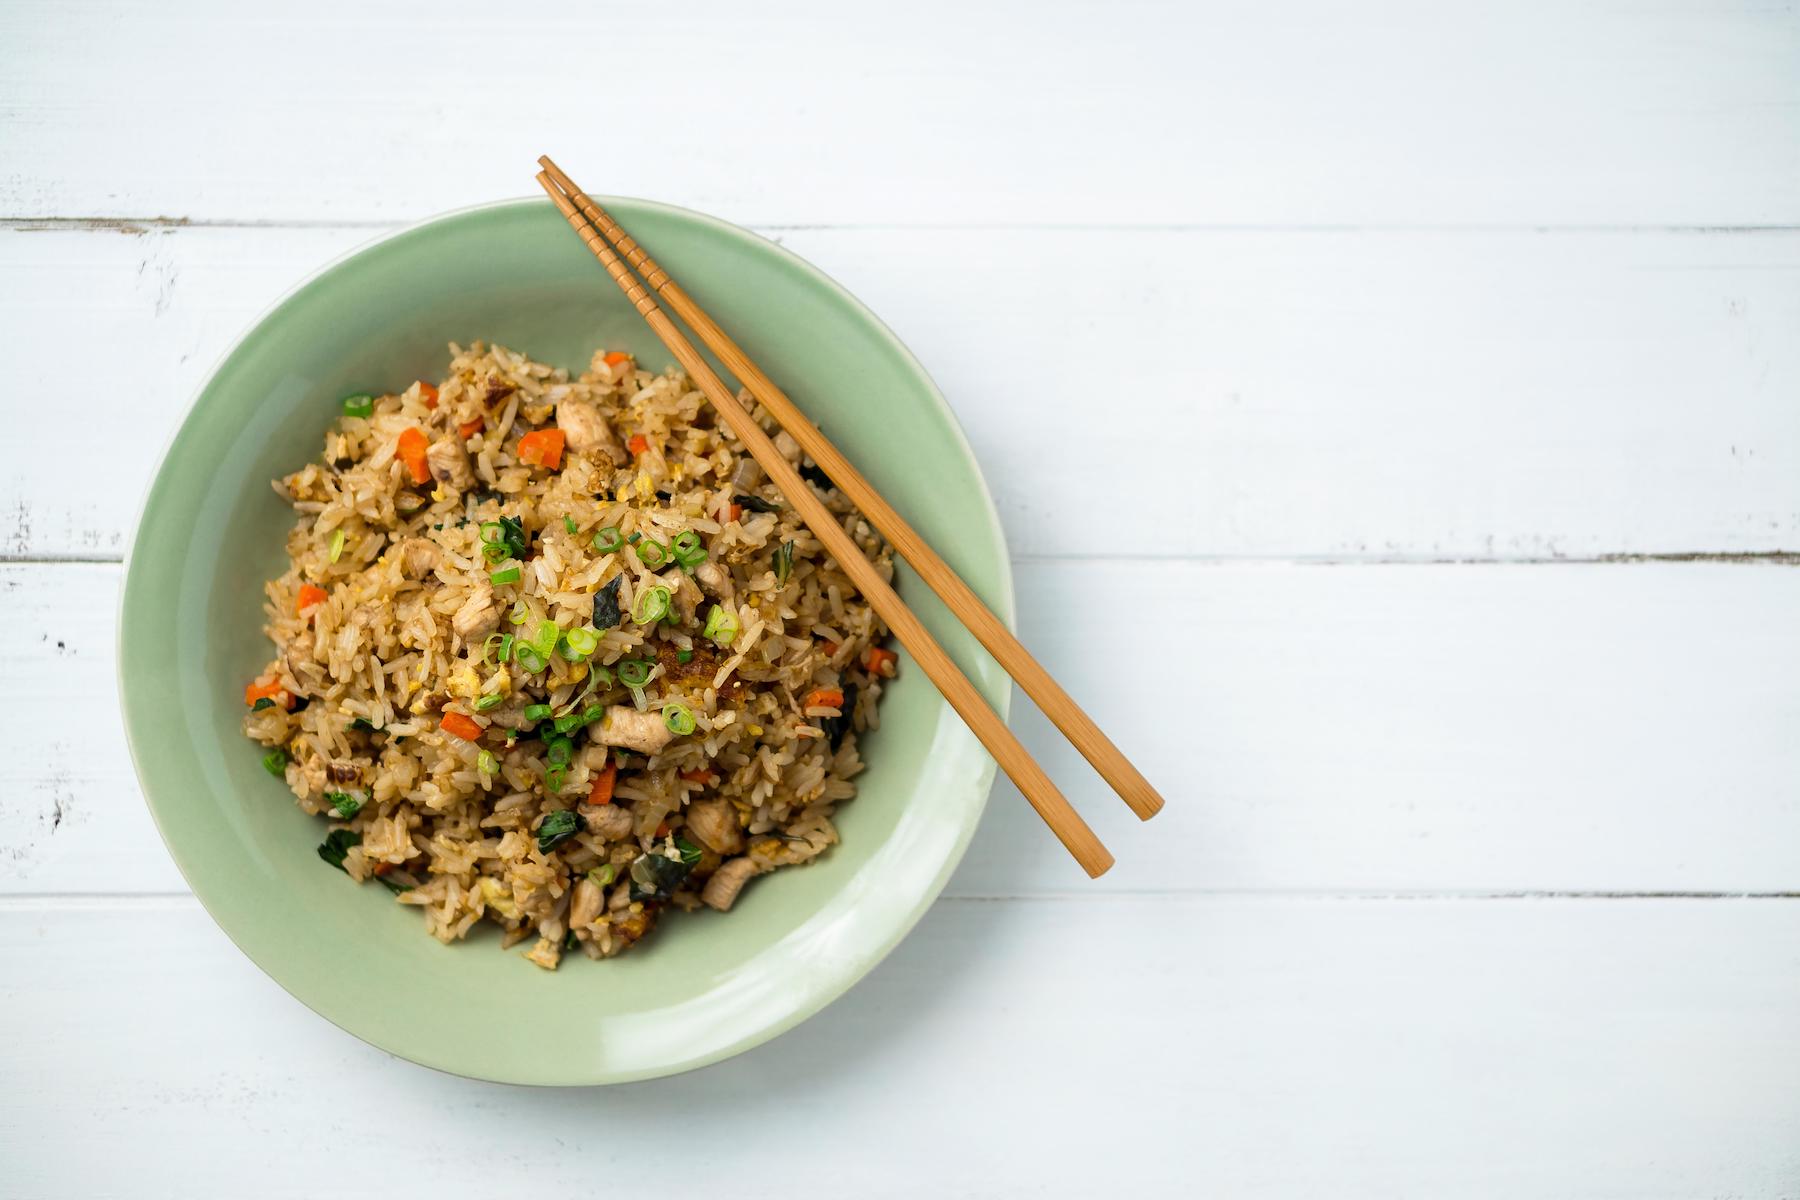 Fried rice with vegetables in a light green bowl on a white plank table with chopsticks.